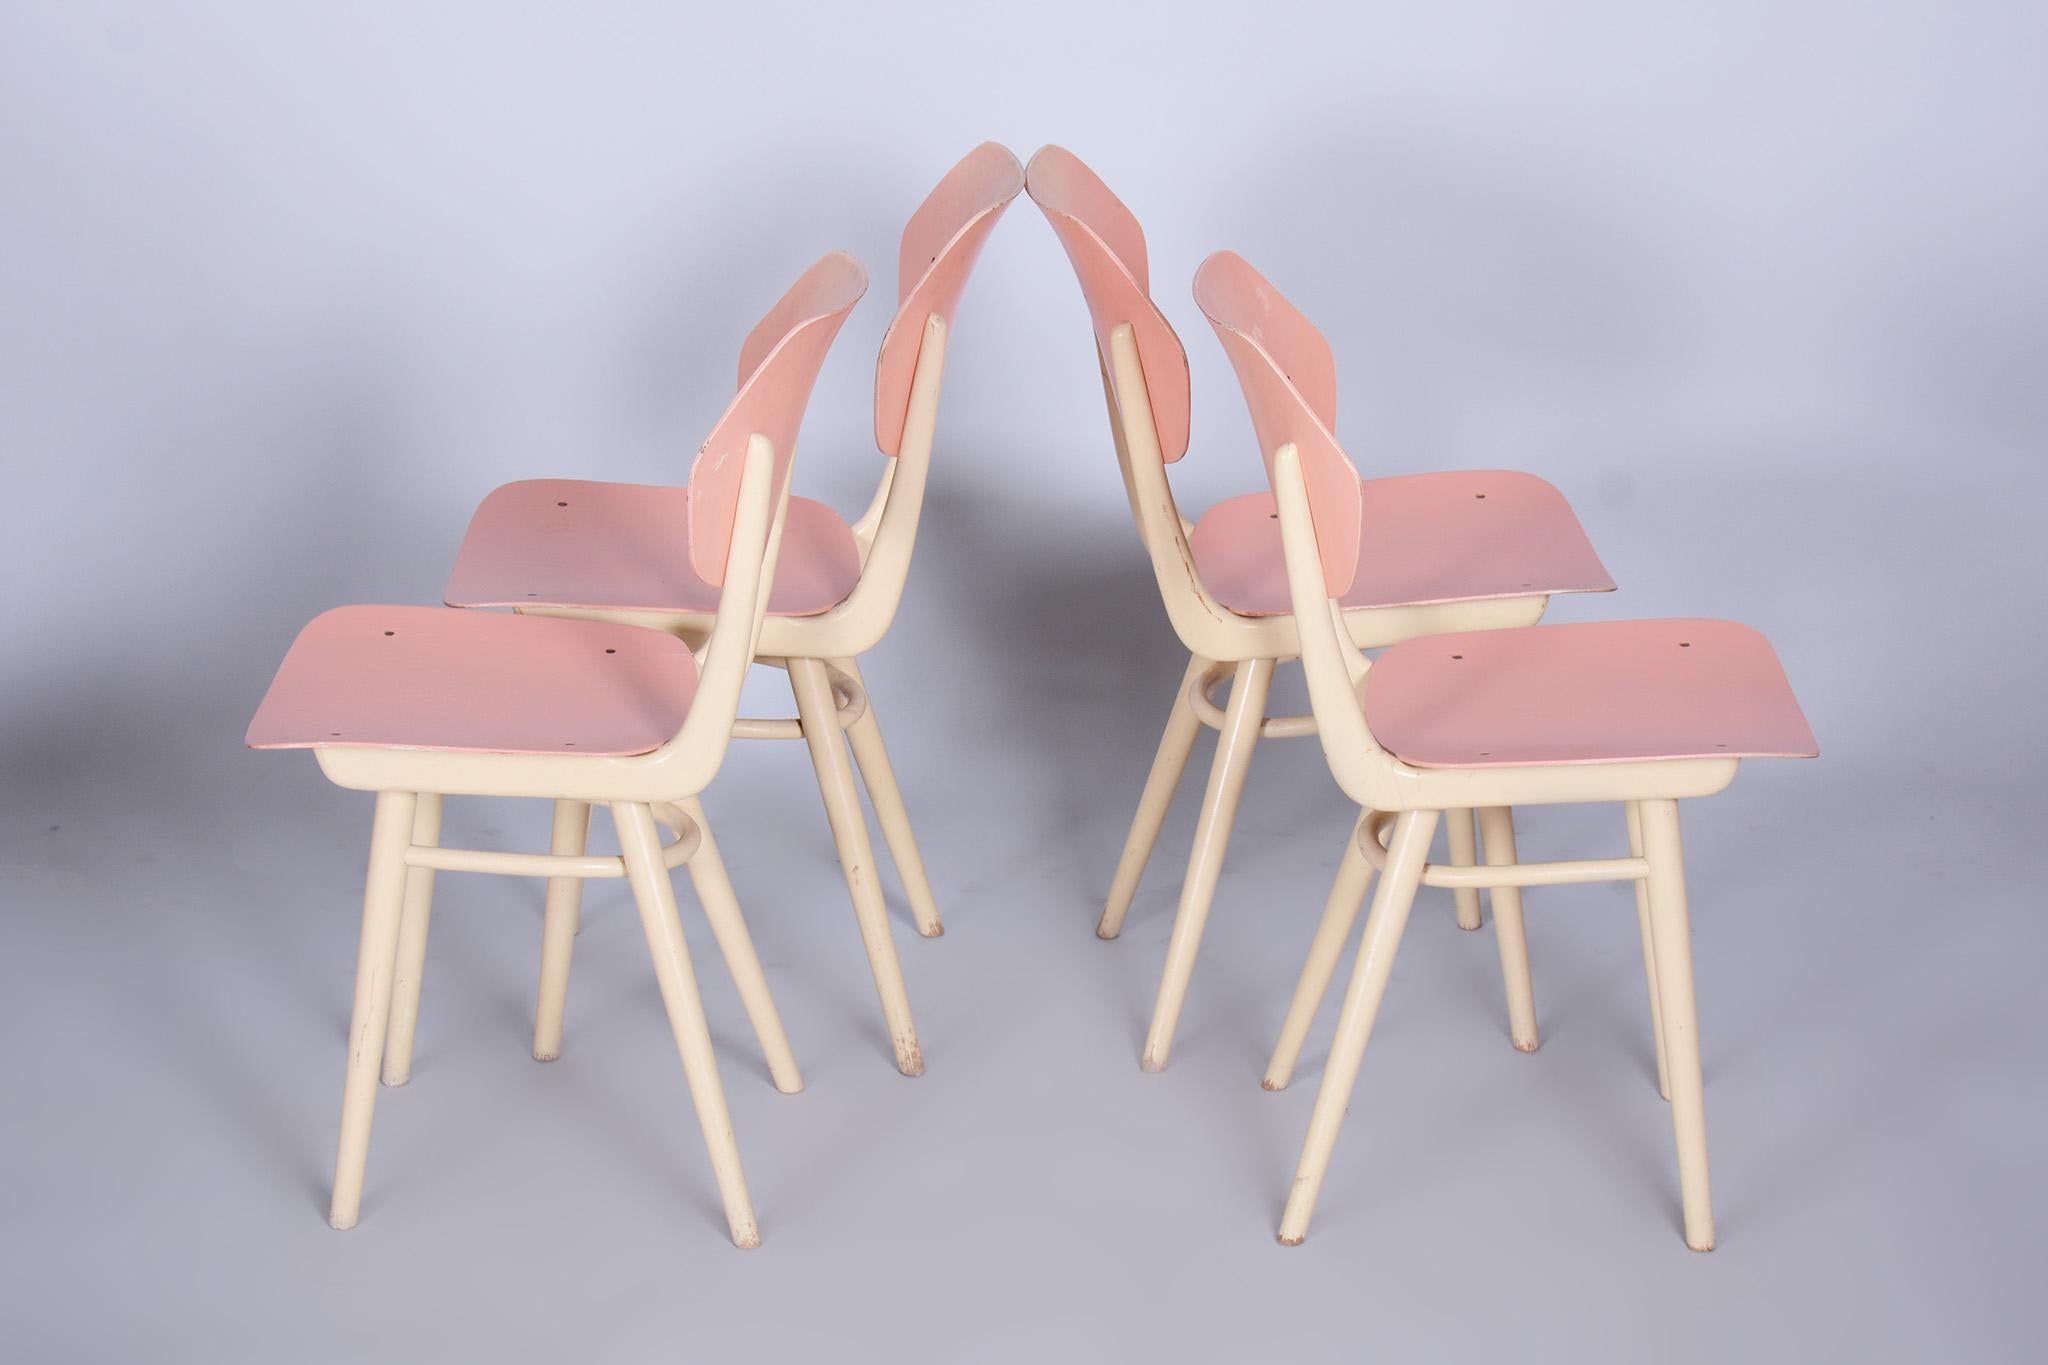 Set of Four Original Mid-Century Chairs.

Maker: Jitona Sobeslav
Source: Czechia
Period: 1950-1959
Material: Beech, Painted Plywood

Sold as a set.

Original preserved condition. Stable construction.

This item features Classic